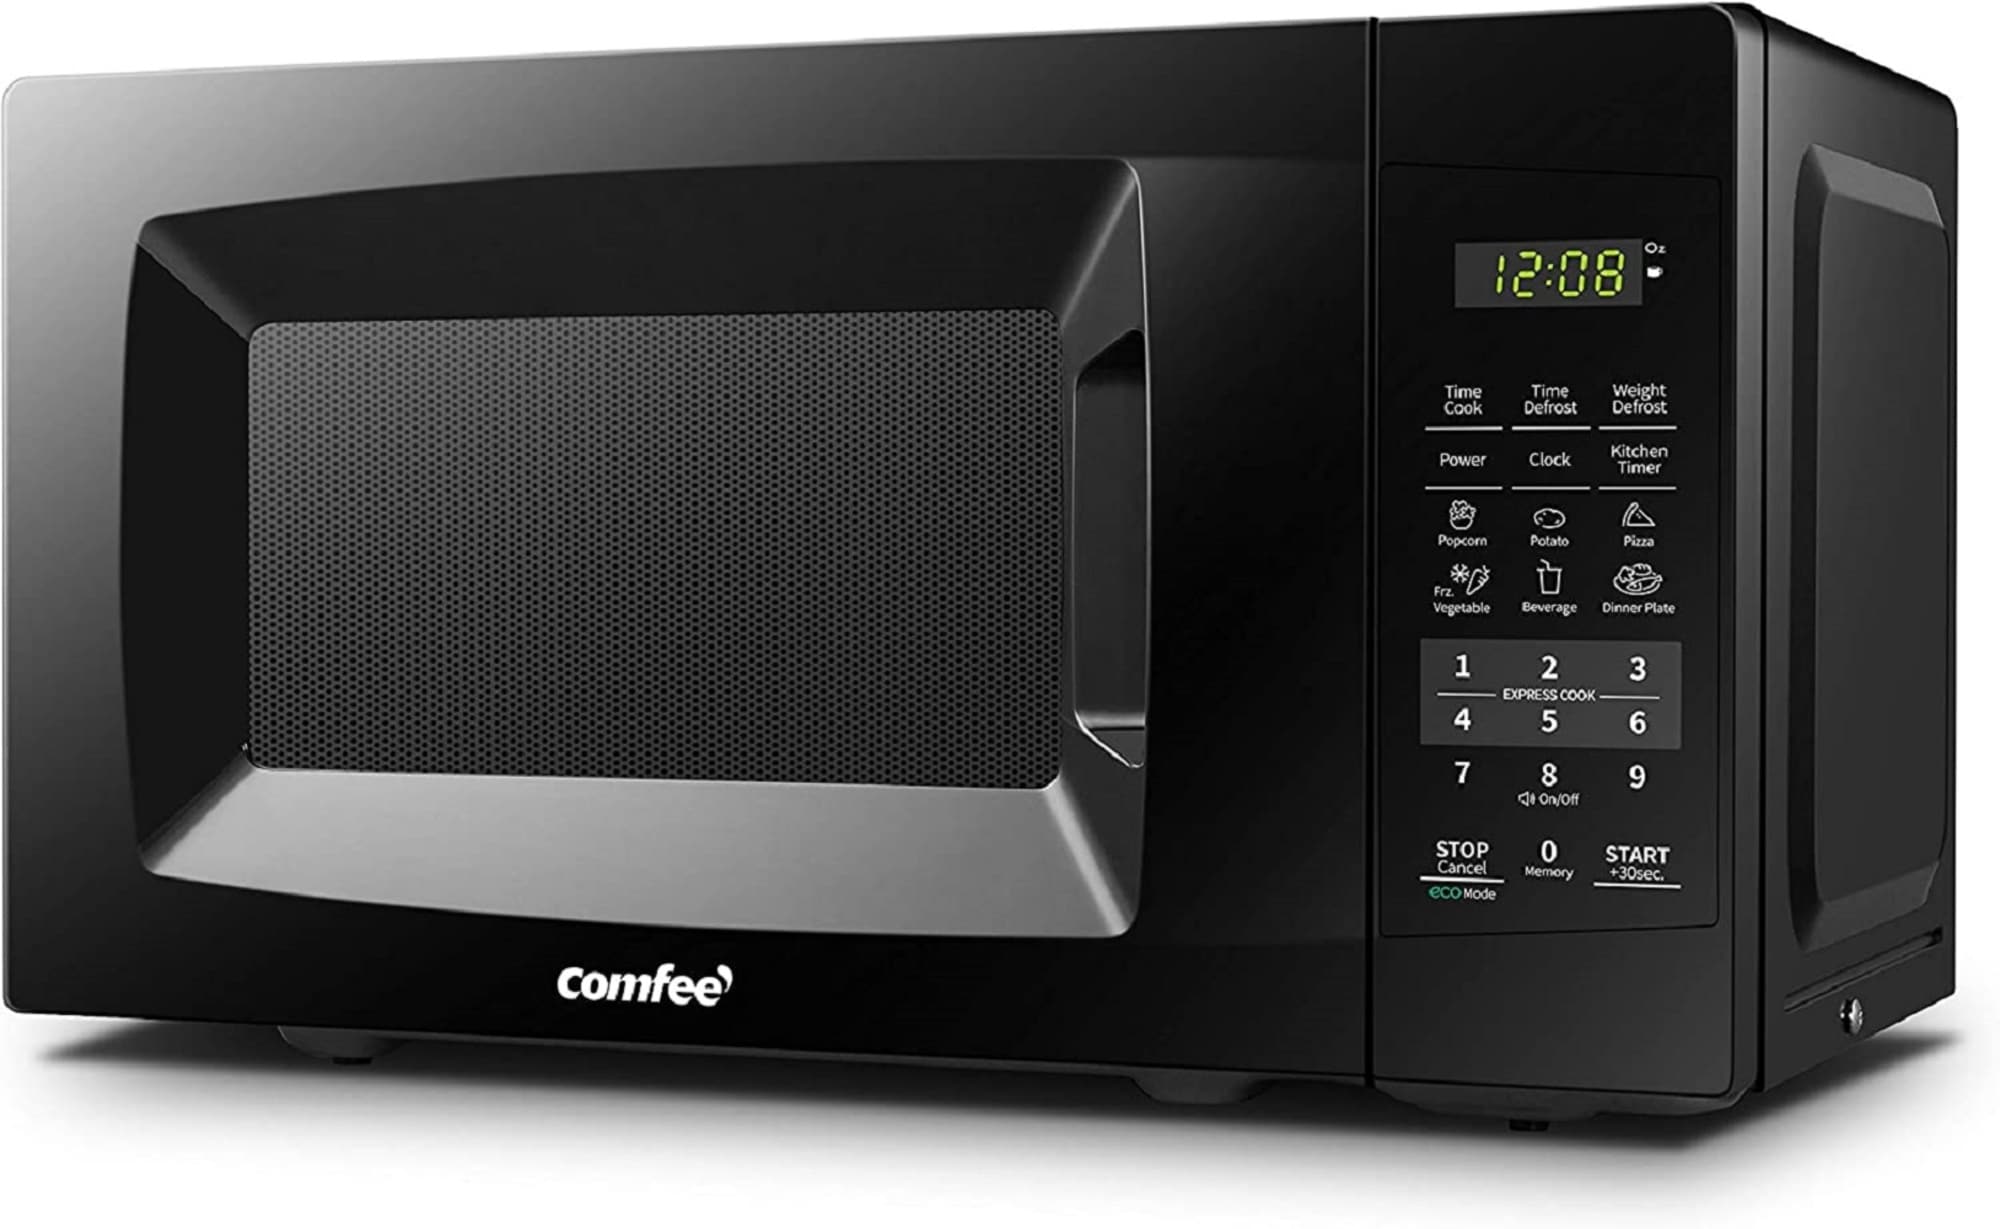 Black+Decker 0.7 Cu. Ft. 700W Stainless Steel Countertop Microwave Oven 